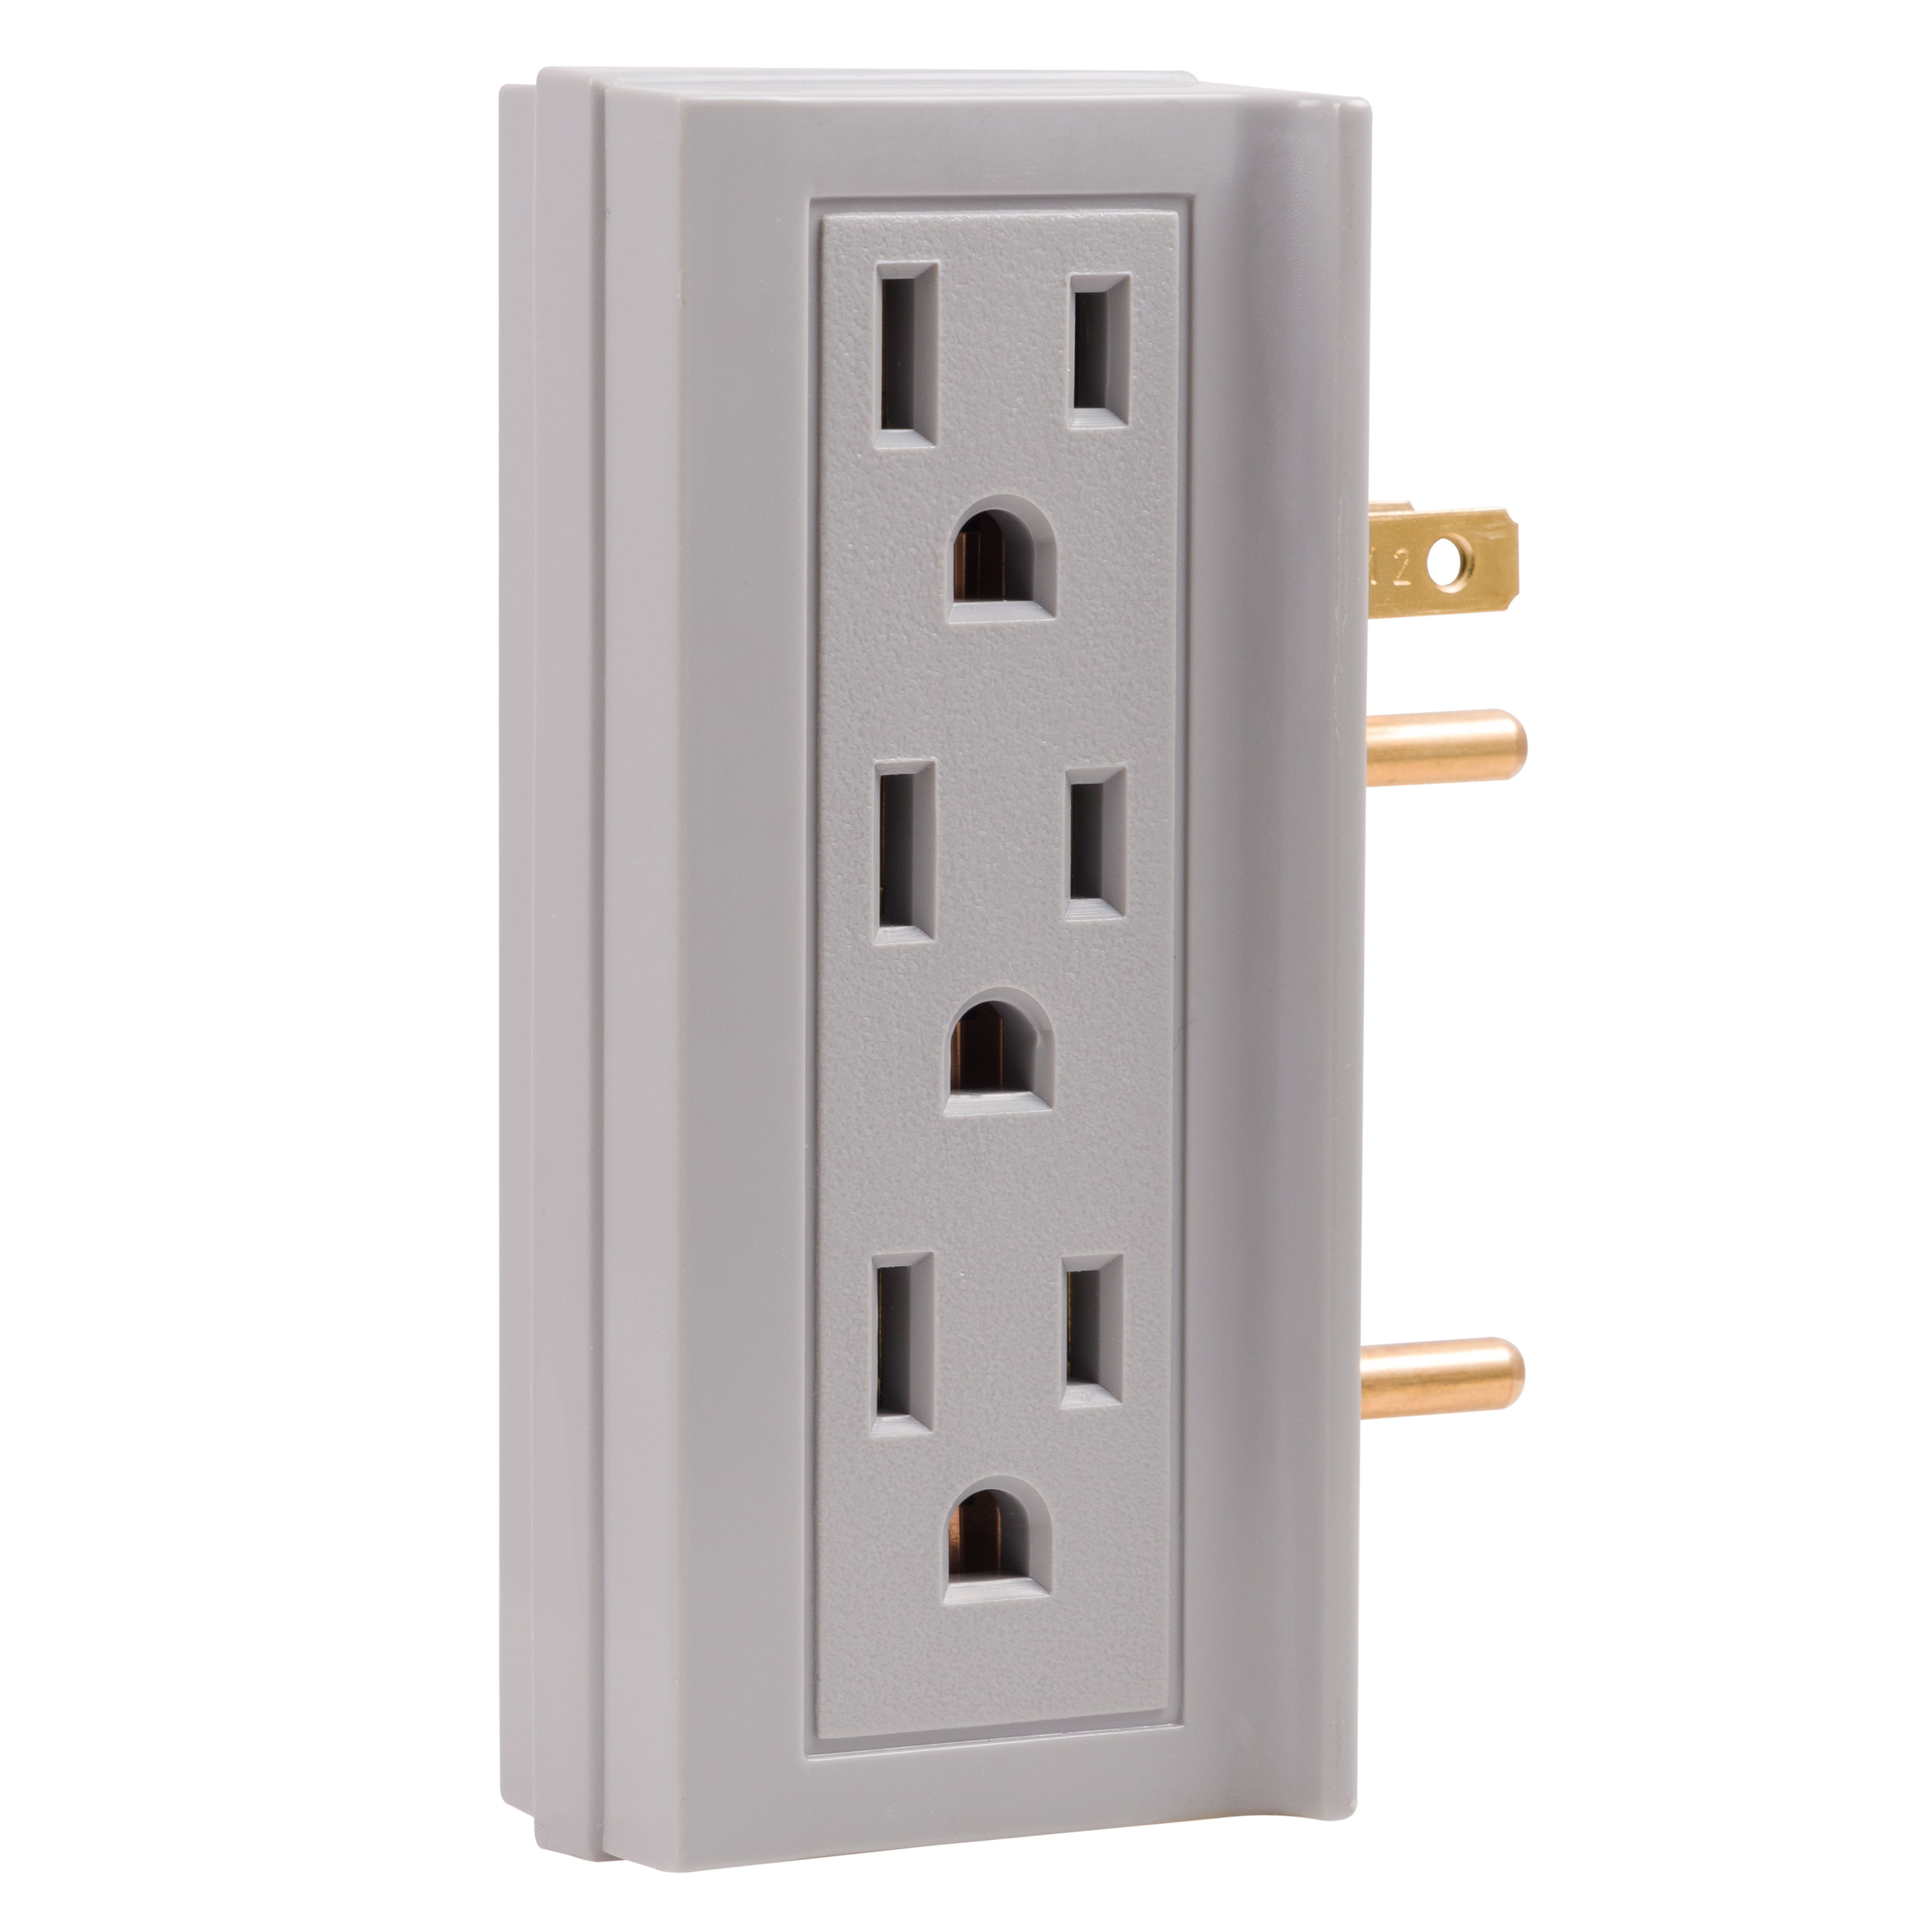 Electrical Extension Grounded 6 Outlet Plug Wall Taps Indoor White 